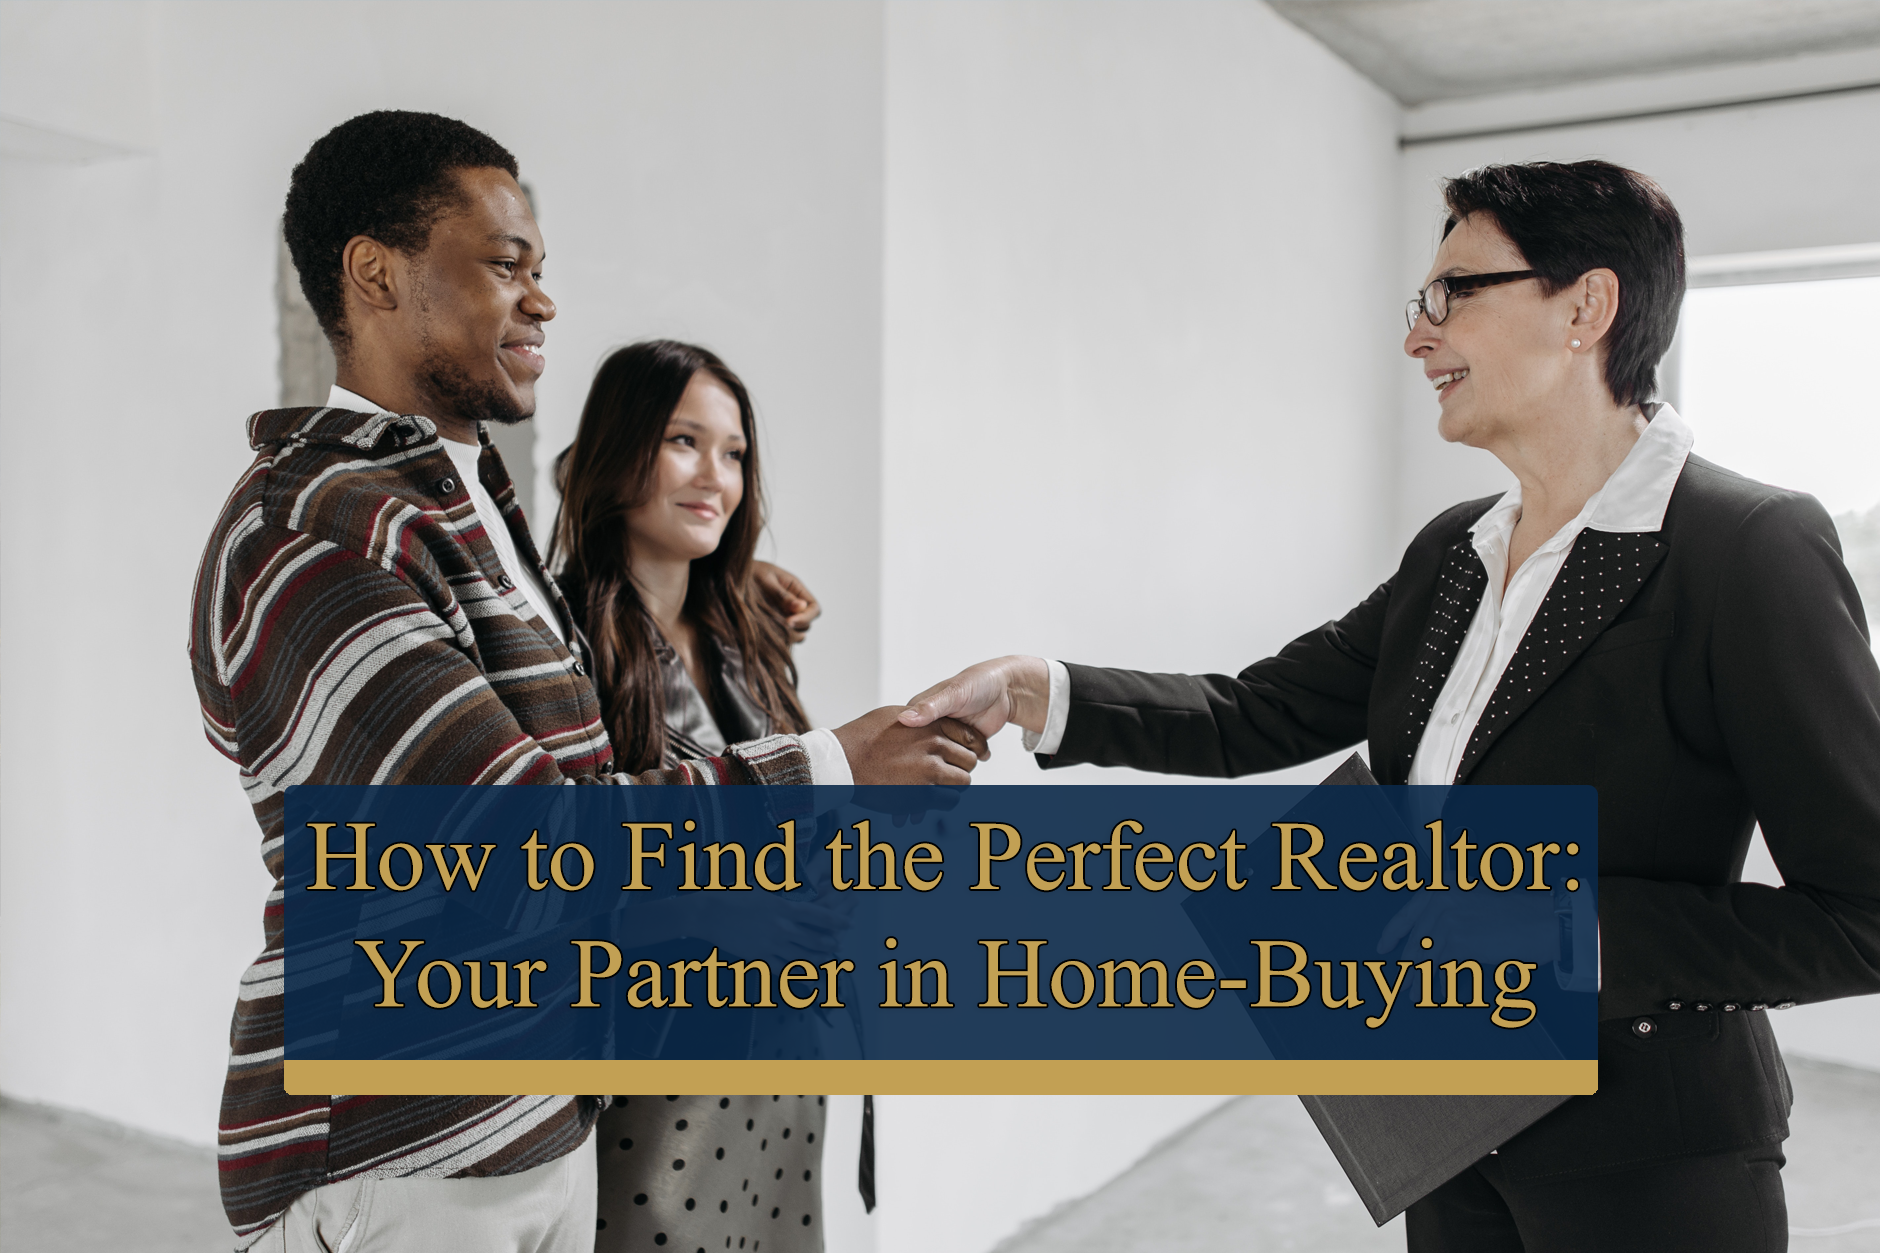 how to find the perfect realtor: your partner in home-buying